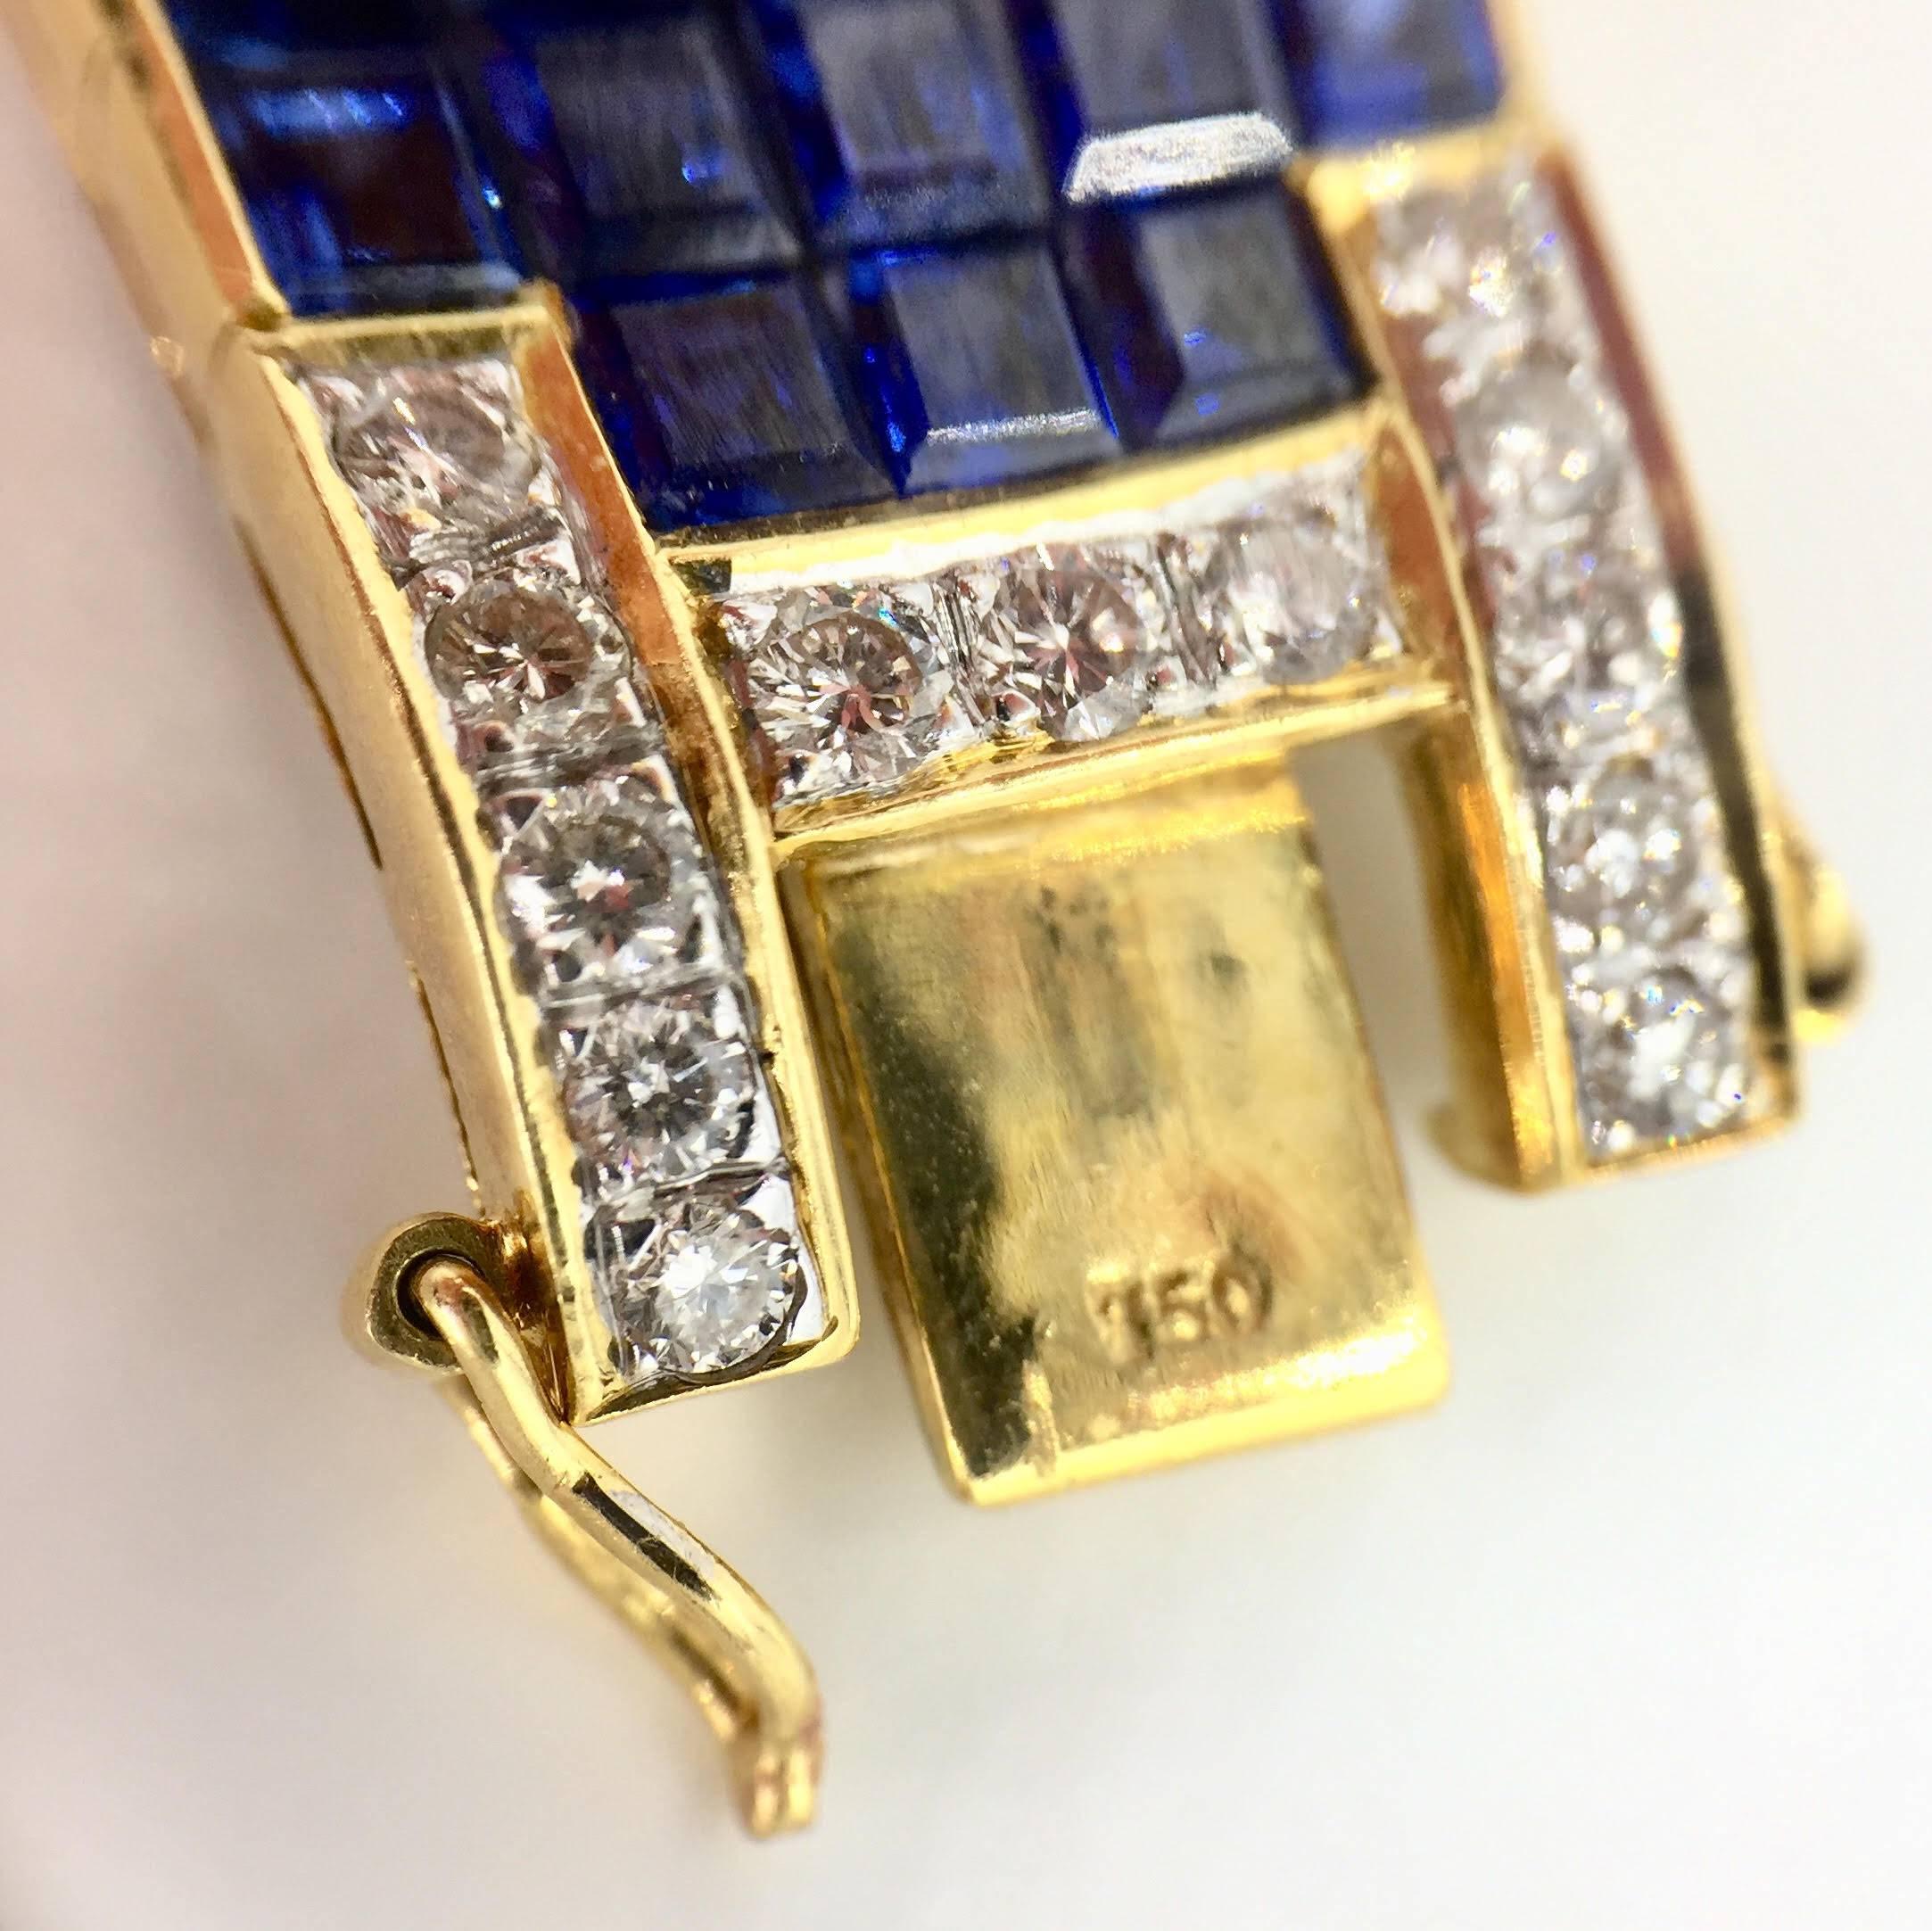 Sapphire and Diamond Wide Bracelet 18K Yellow Gold Approx. 35 Carats Sapphire TW For Sale 2